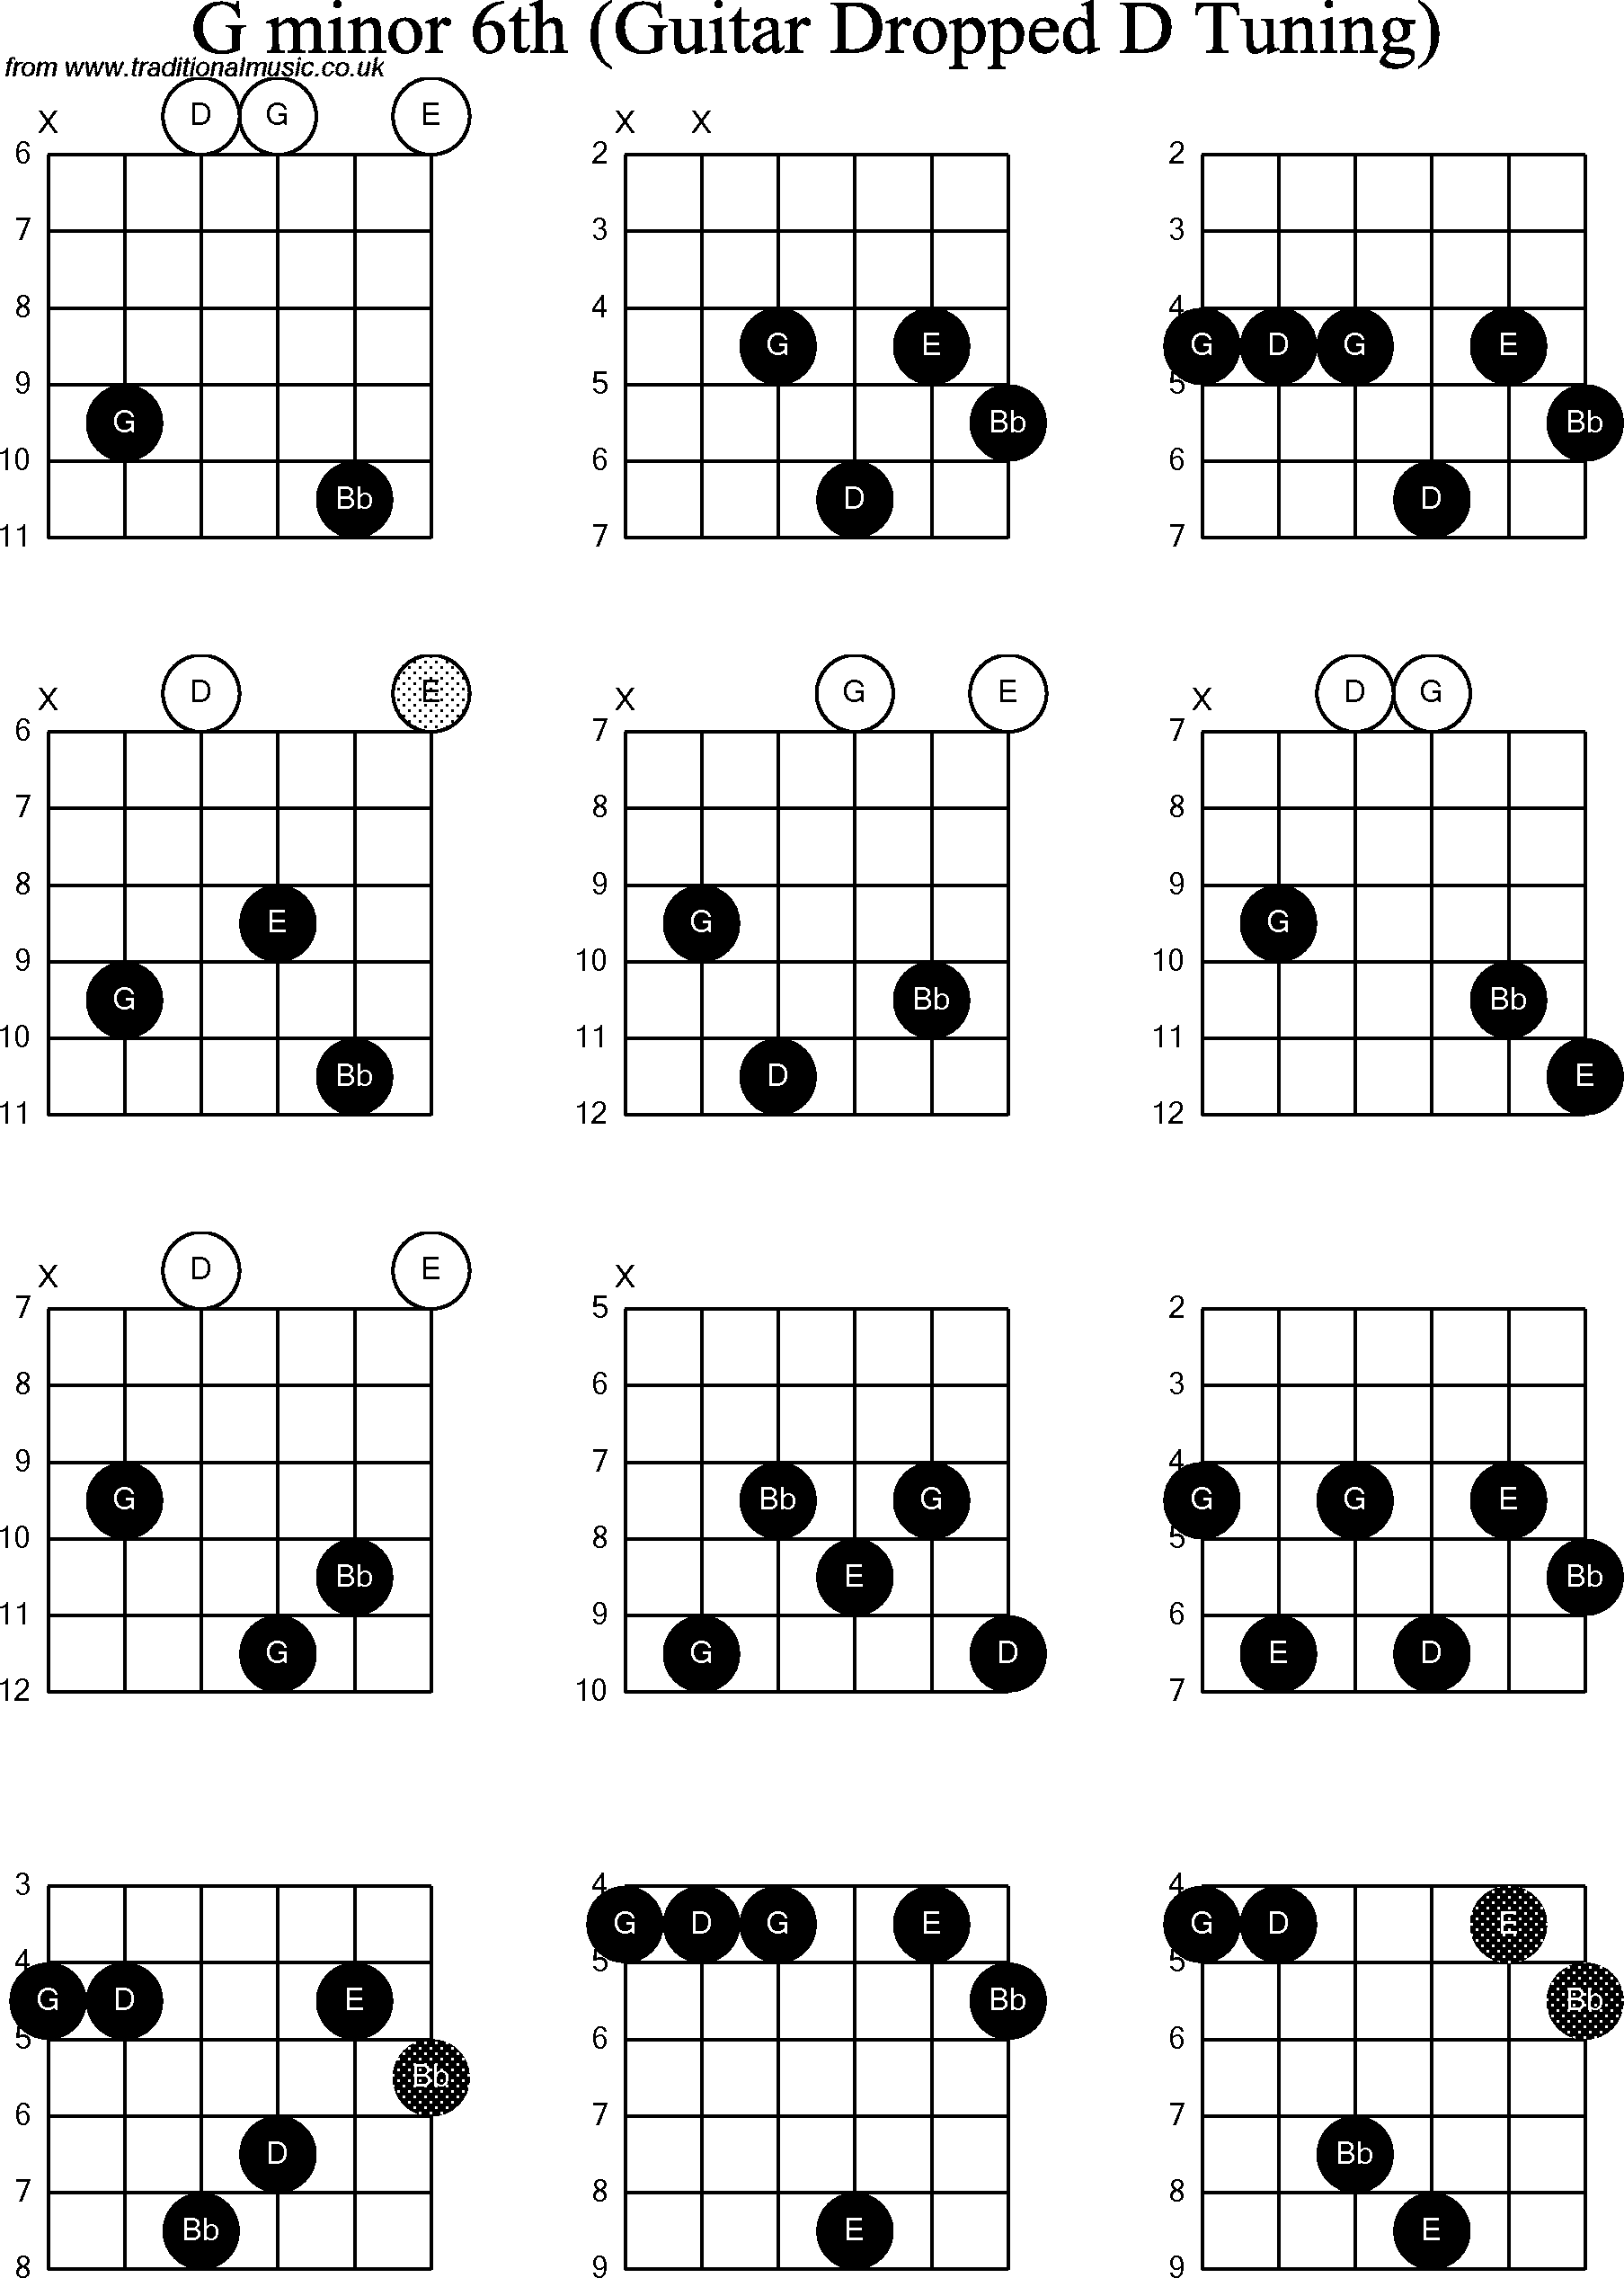 Chord diagrams for dropped D Guitar(DADGBE), G Minor6th